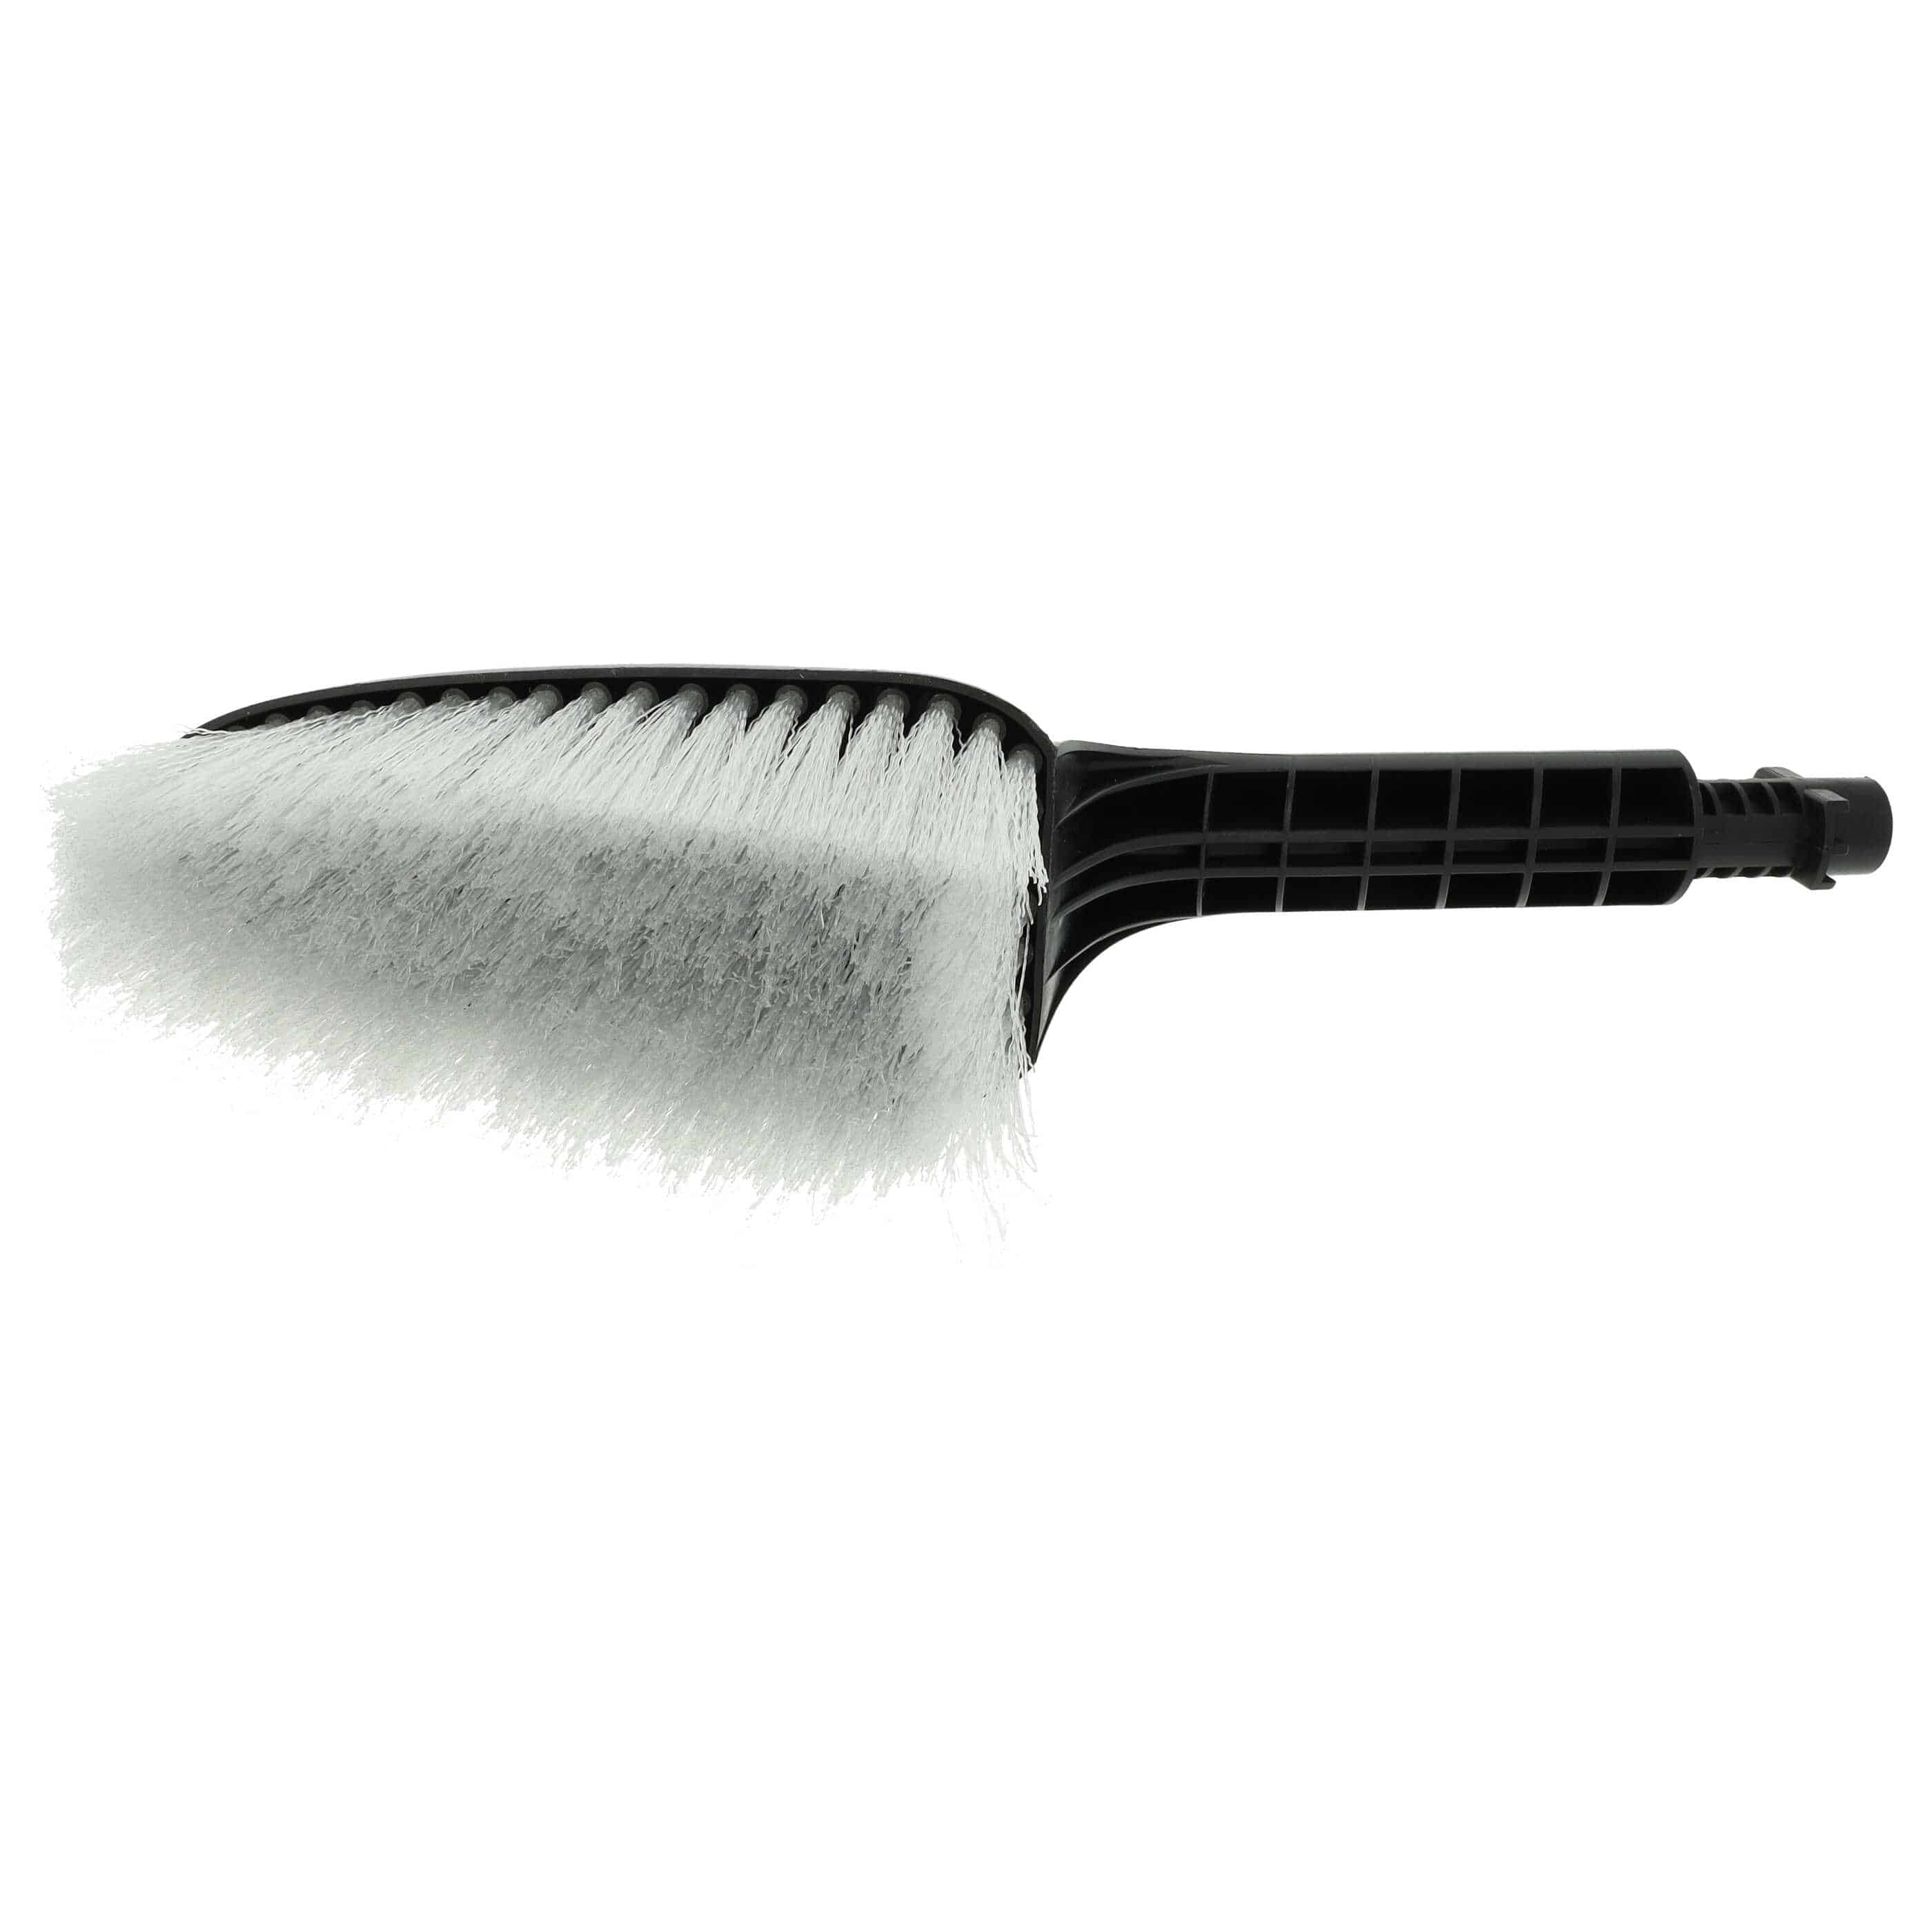 Cleaning Brush as Replacement for Kärcher 6.903-276.0 - 10 cm wide, 34 cm long, Black White